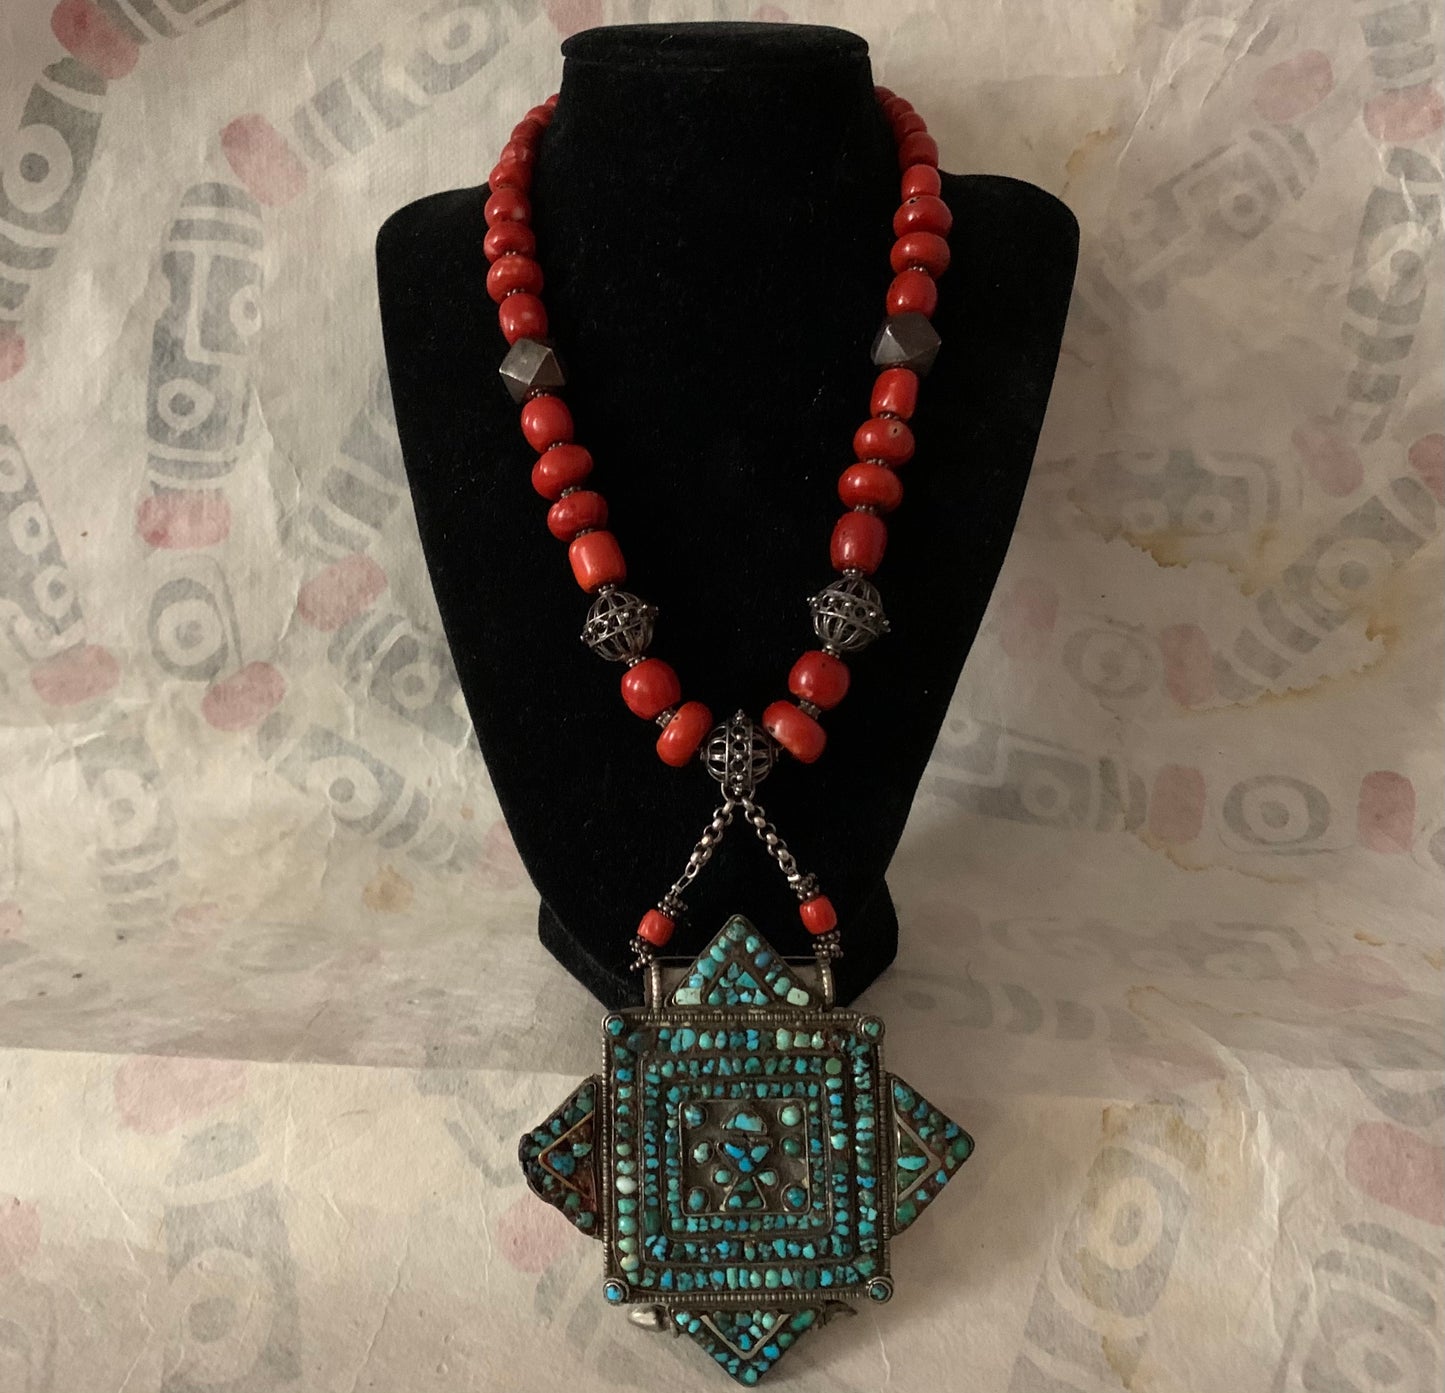 A vintage Tibetan silver and turquoise ghau pendant with an antique red coral bead and silver bead necklace